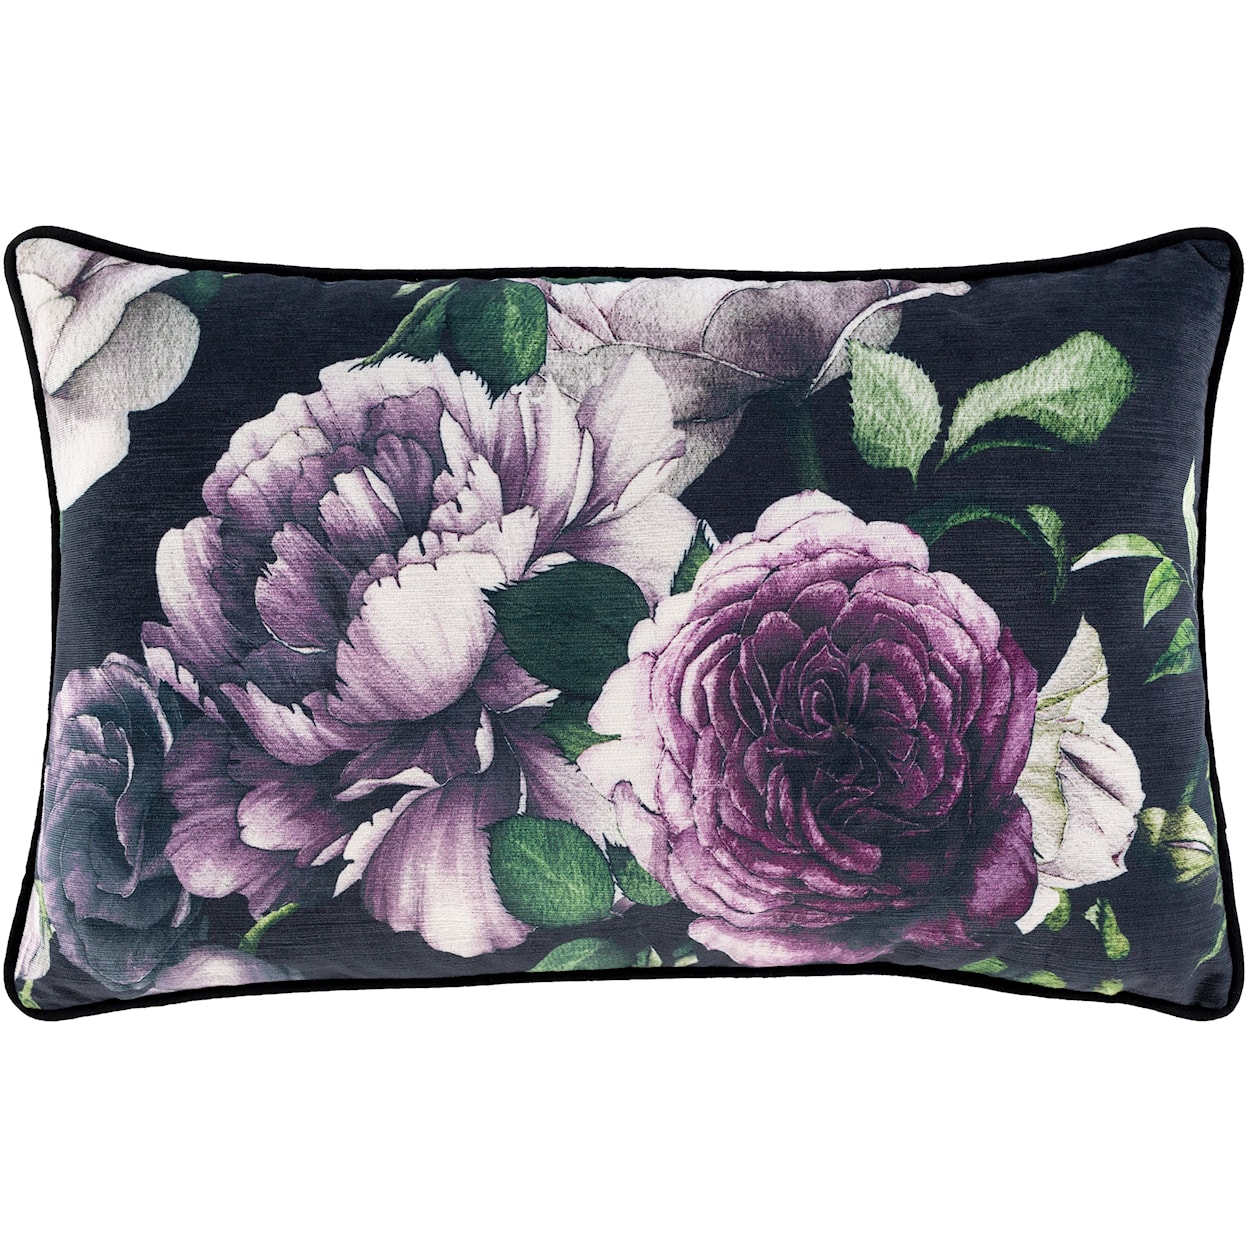 Surya Rugs Horticulture Pillow Kit